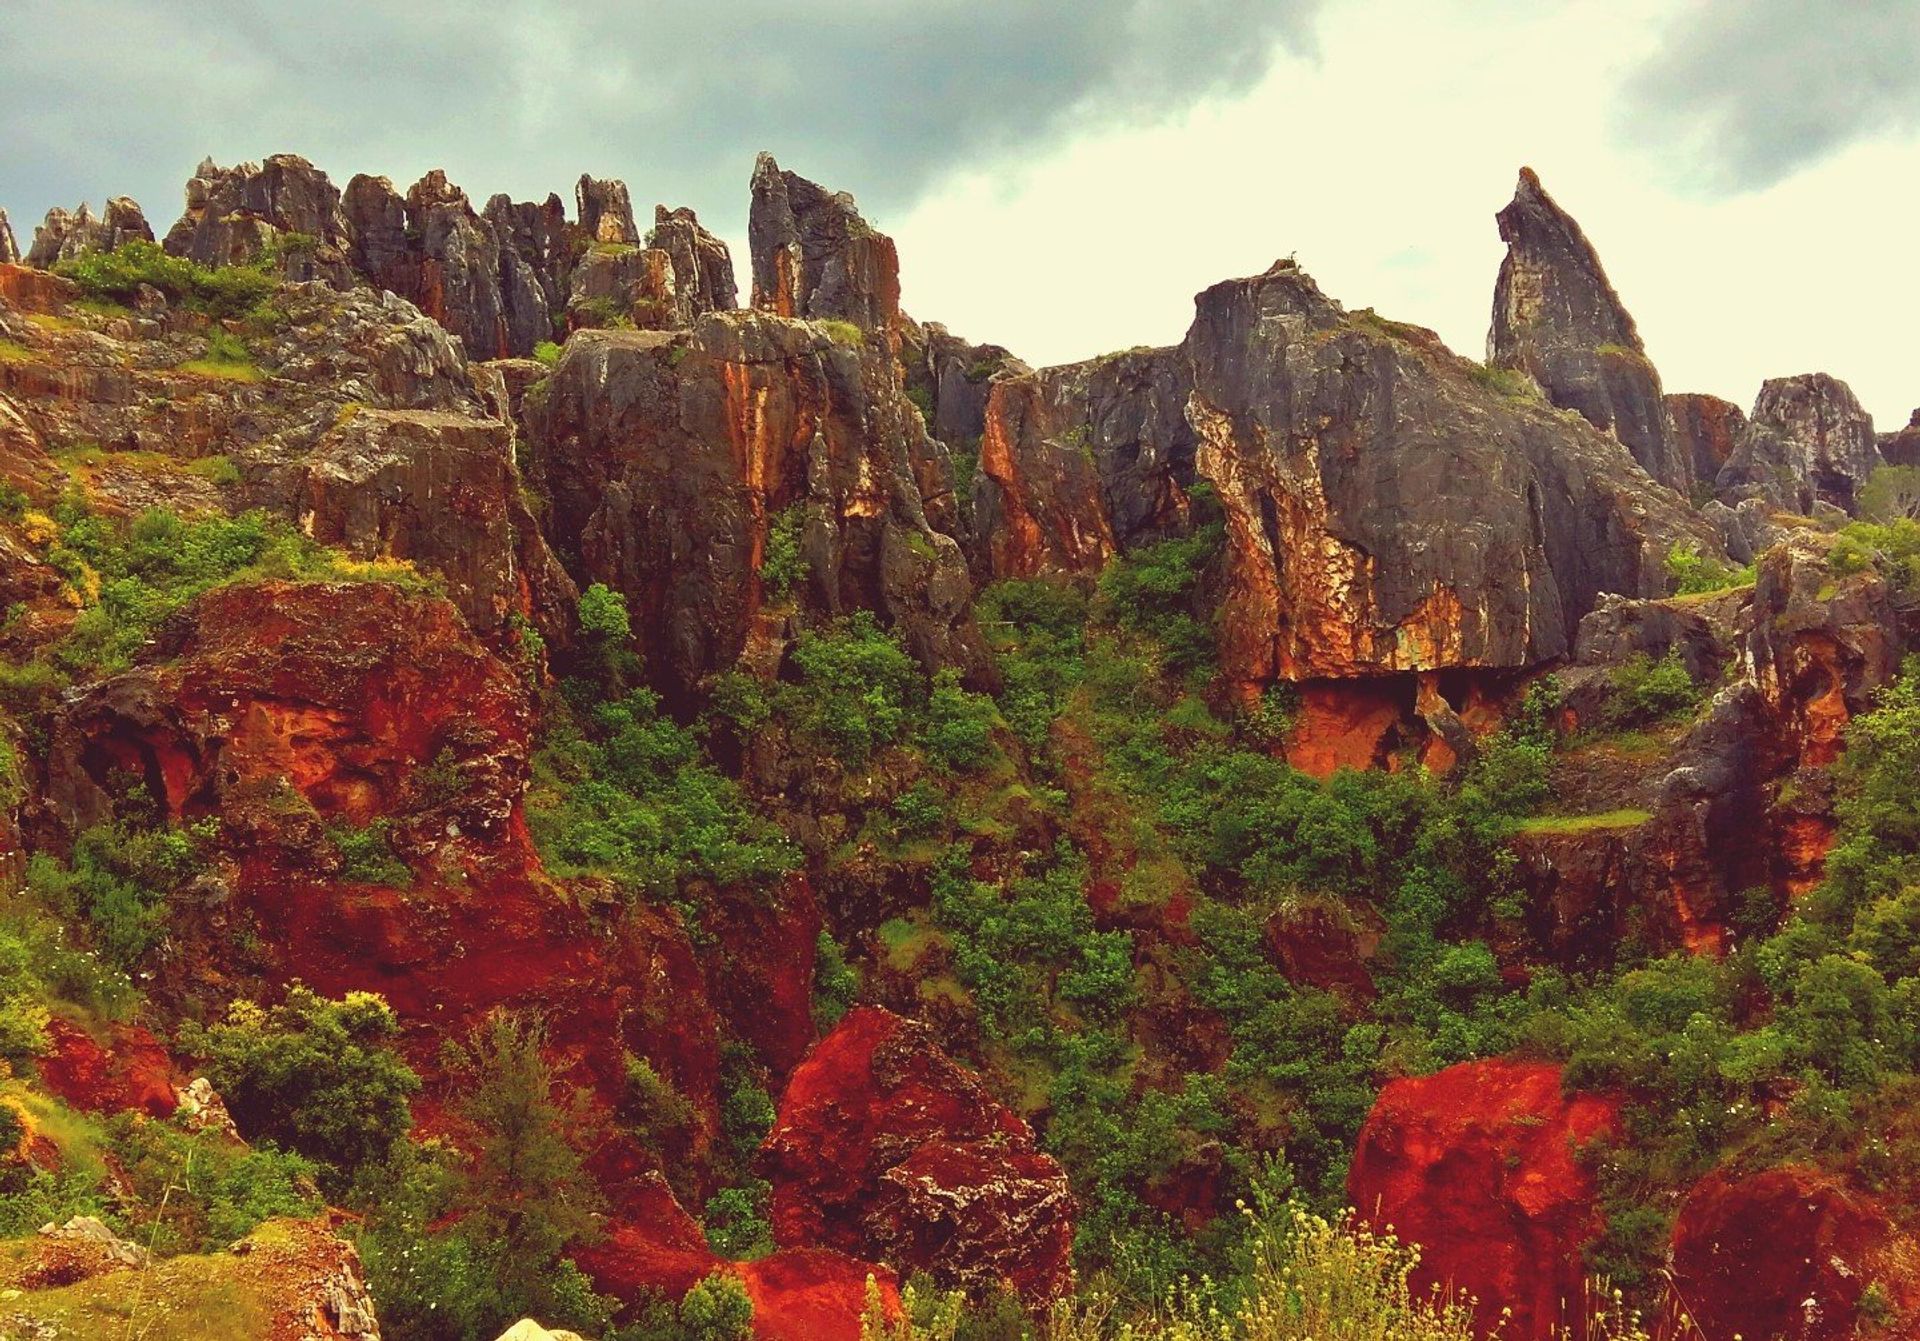 The rocky landscape of Cerro del Hierro blends perfectly with September's autumn leaves